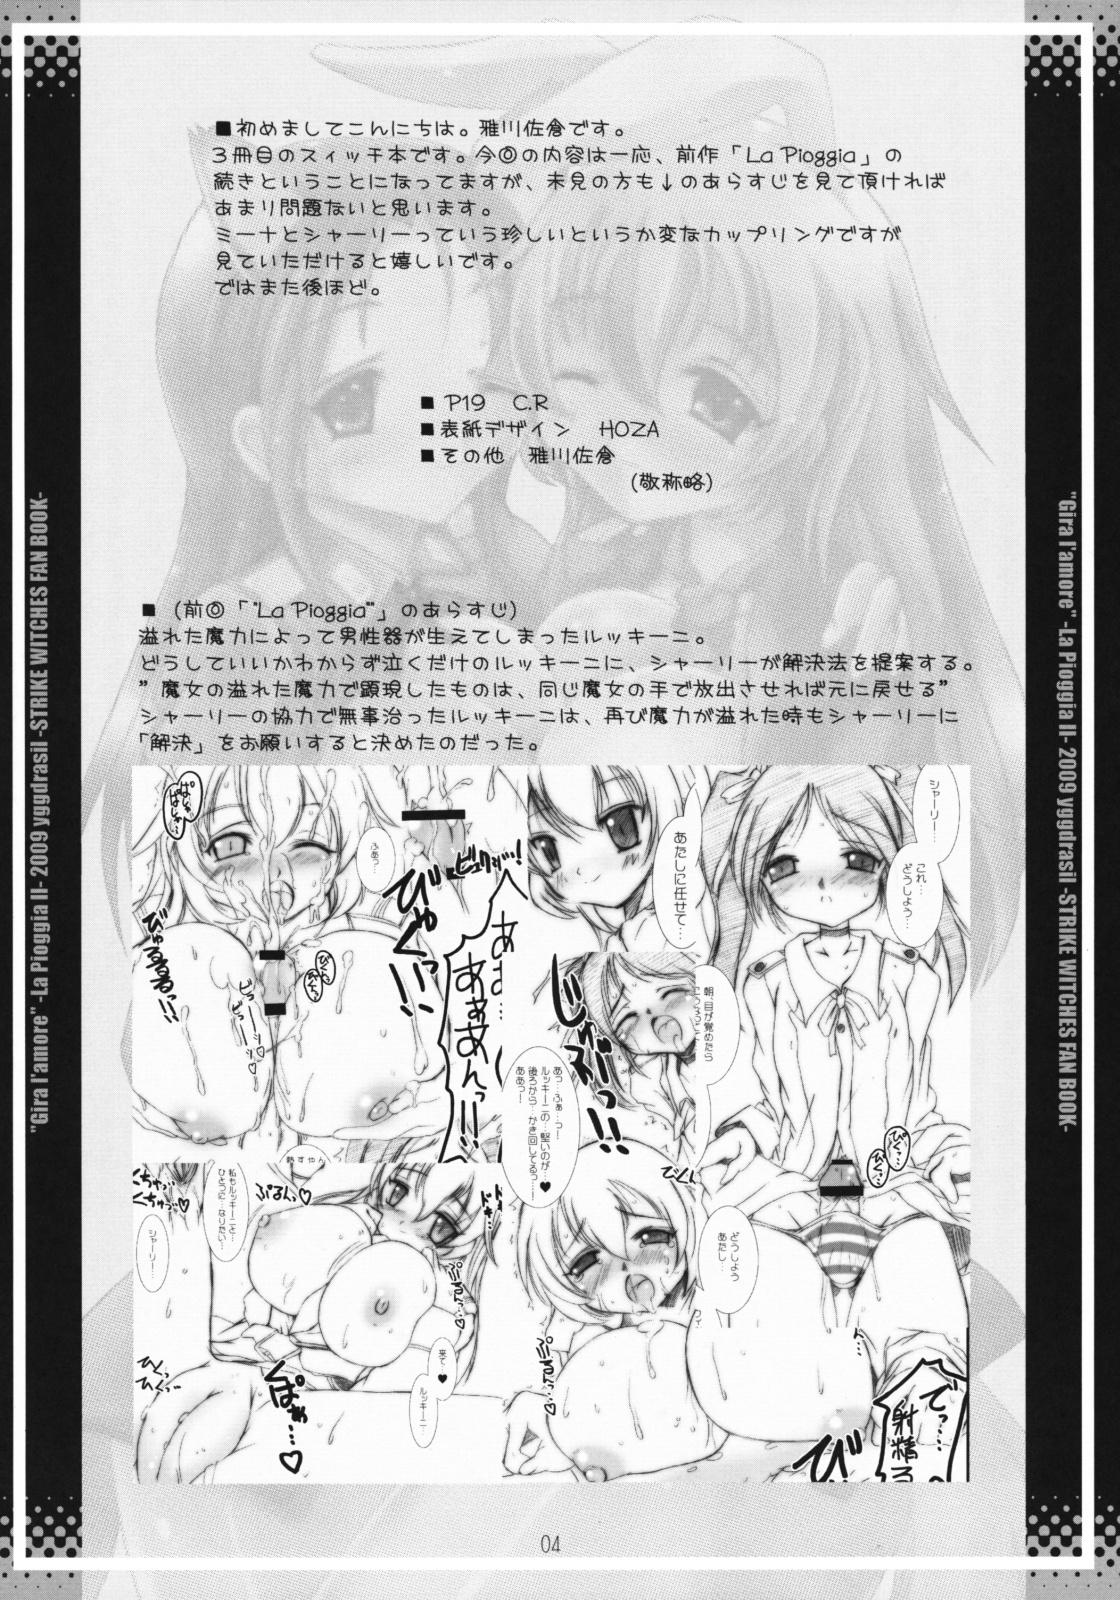 18yearsold Gira l'amore - Strike witches Hot Whores - Page 3